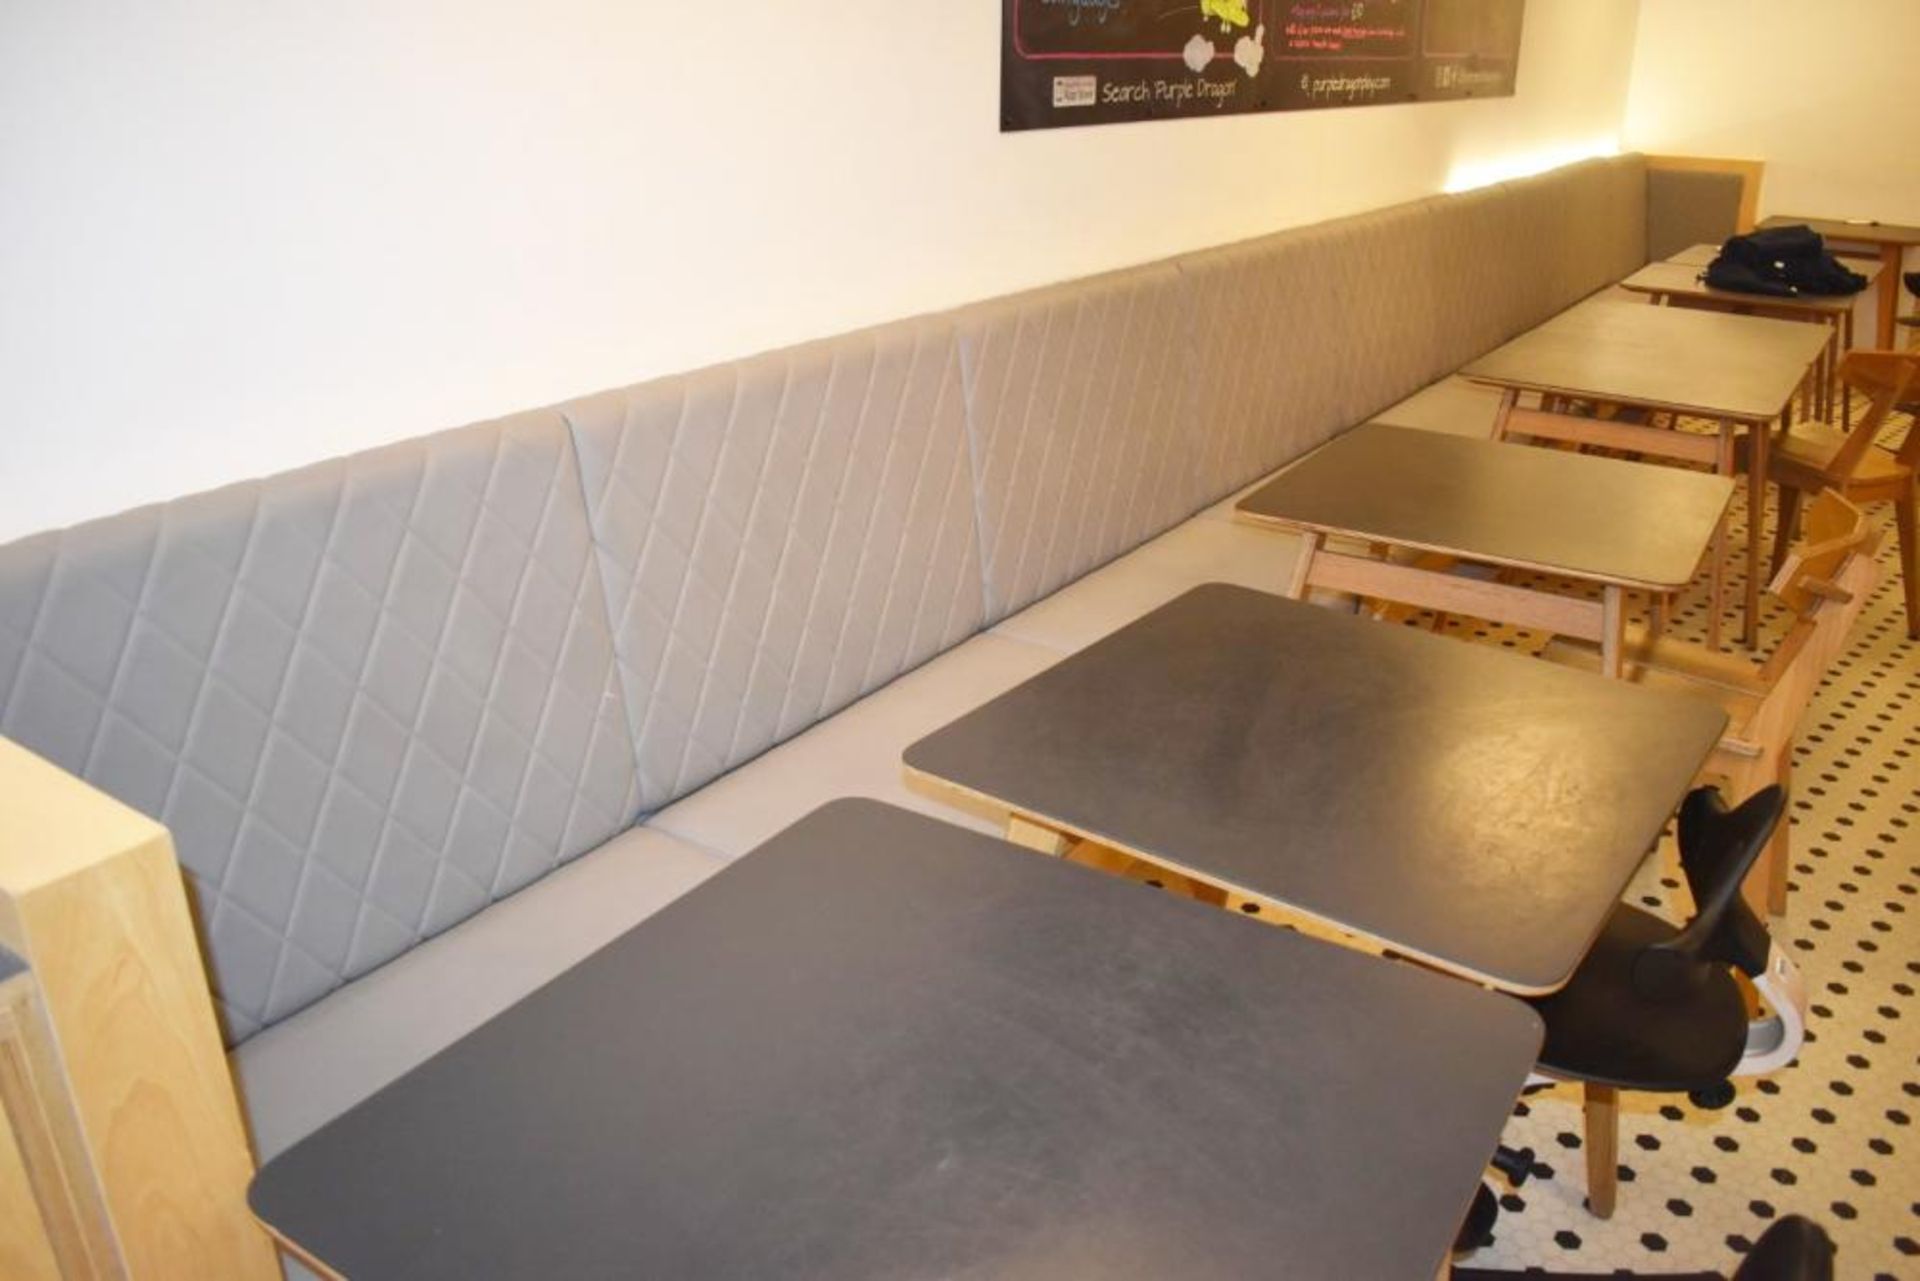 1 x Seating Banquette With Diamond Faux Leather Design Upholstery in Grey - Approx 25ft in - Image 2 of 5